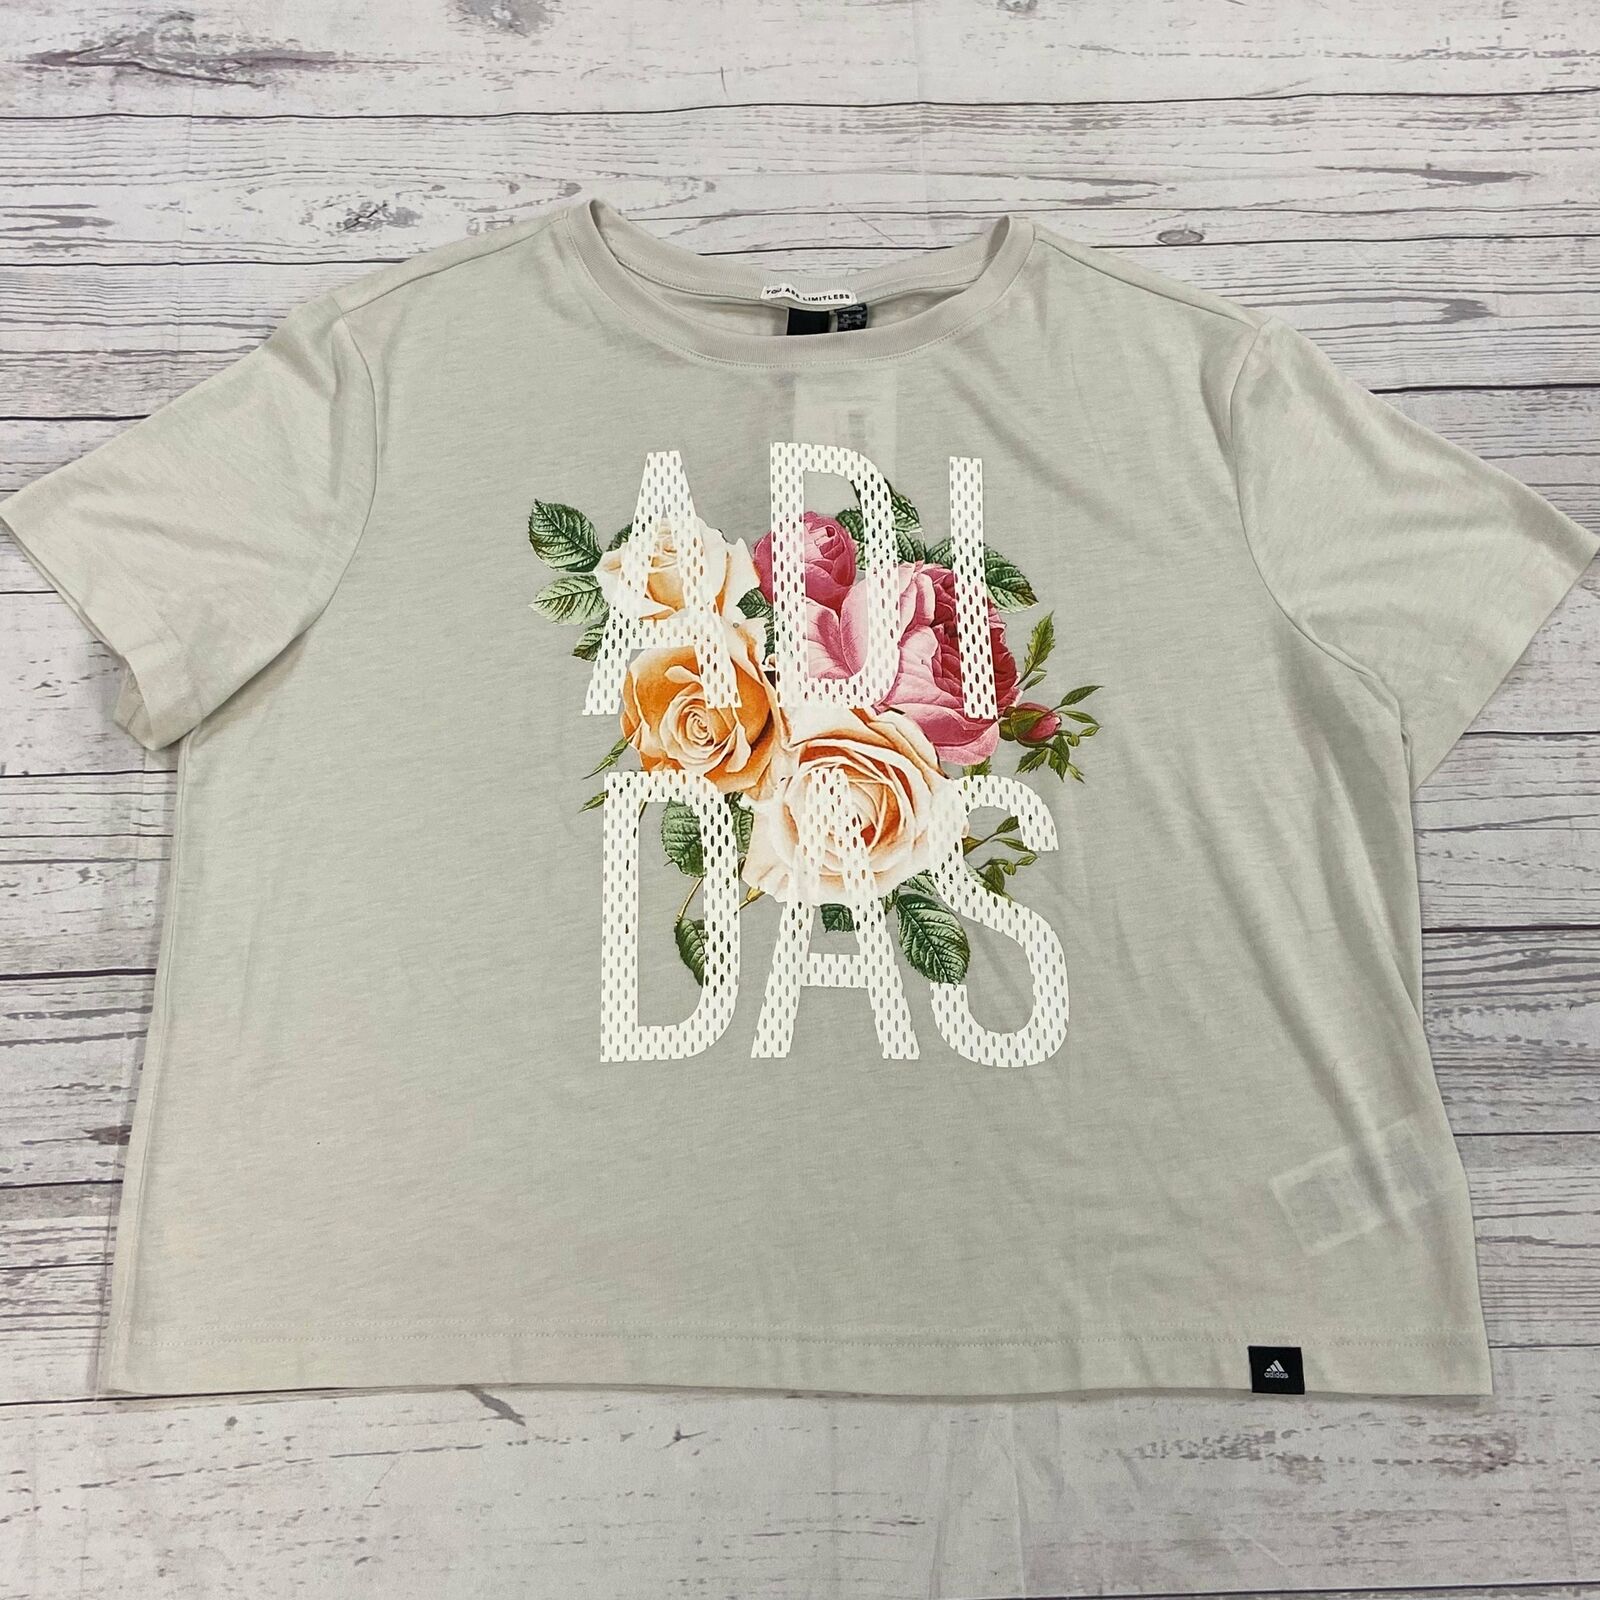 Adidas Gray Athletic Short Sleeve T-Shirt Floral Graphic Women Size XL NEW *